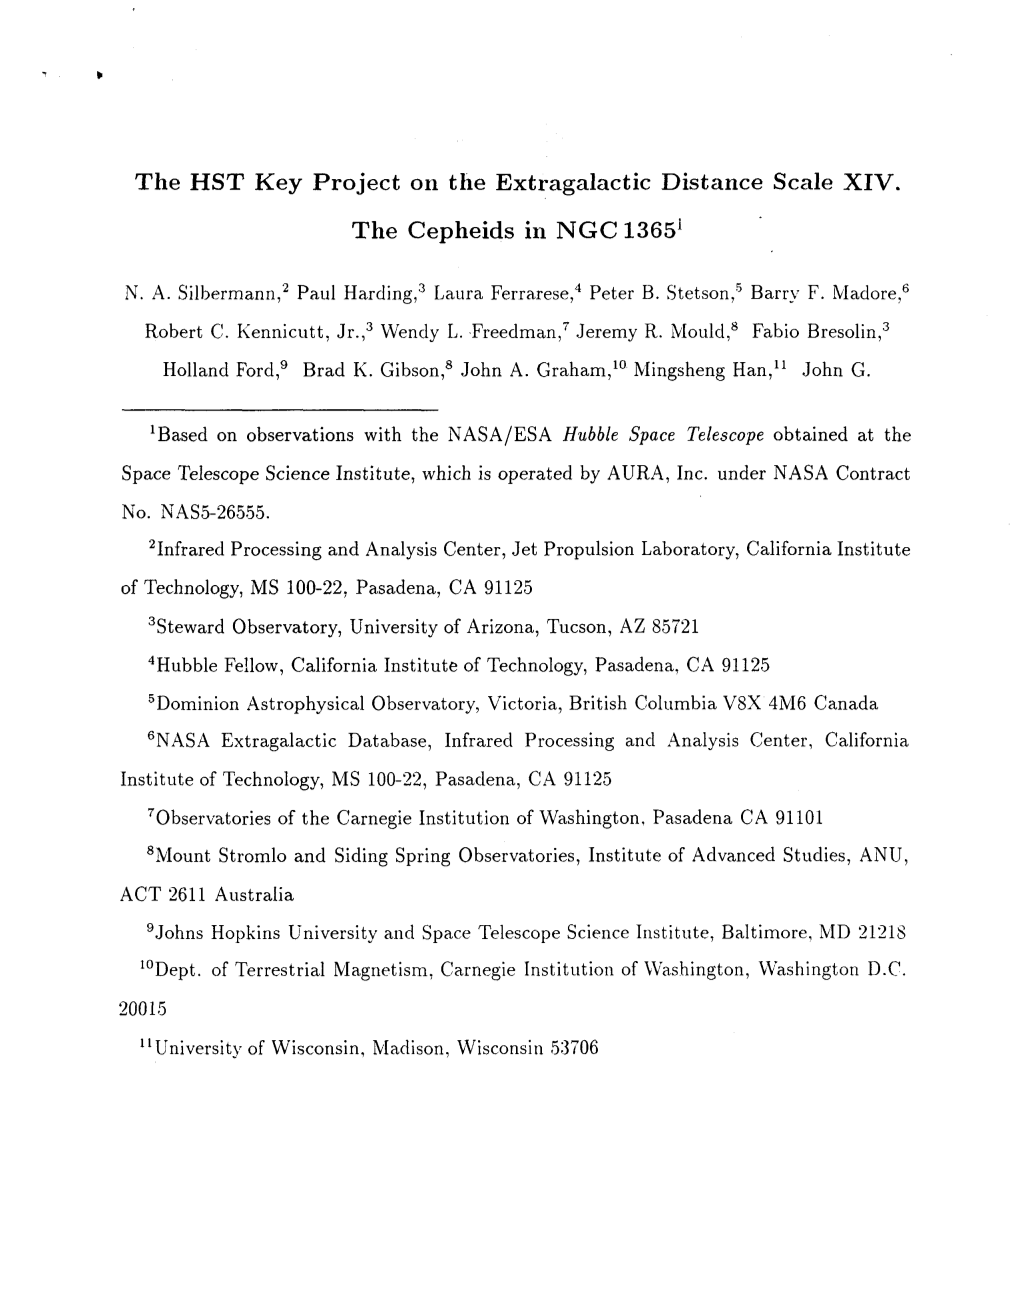 The HST Key Project on the Extragalactic Distance Scale XIV